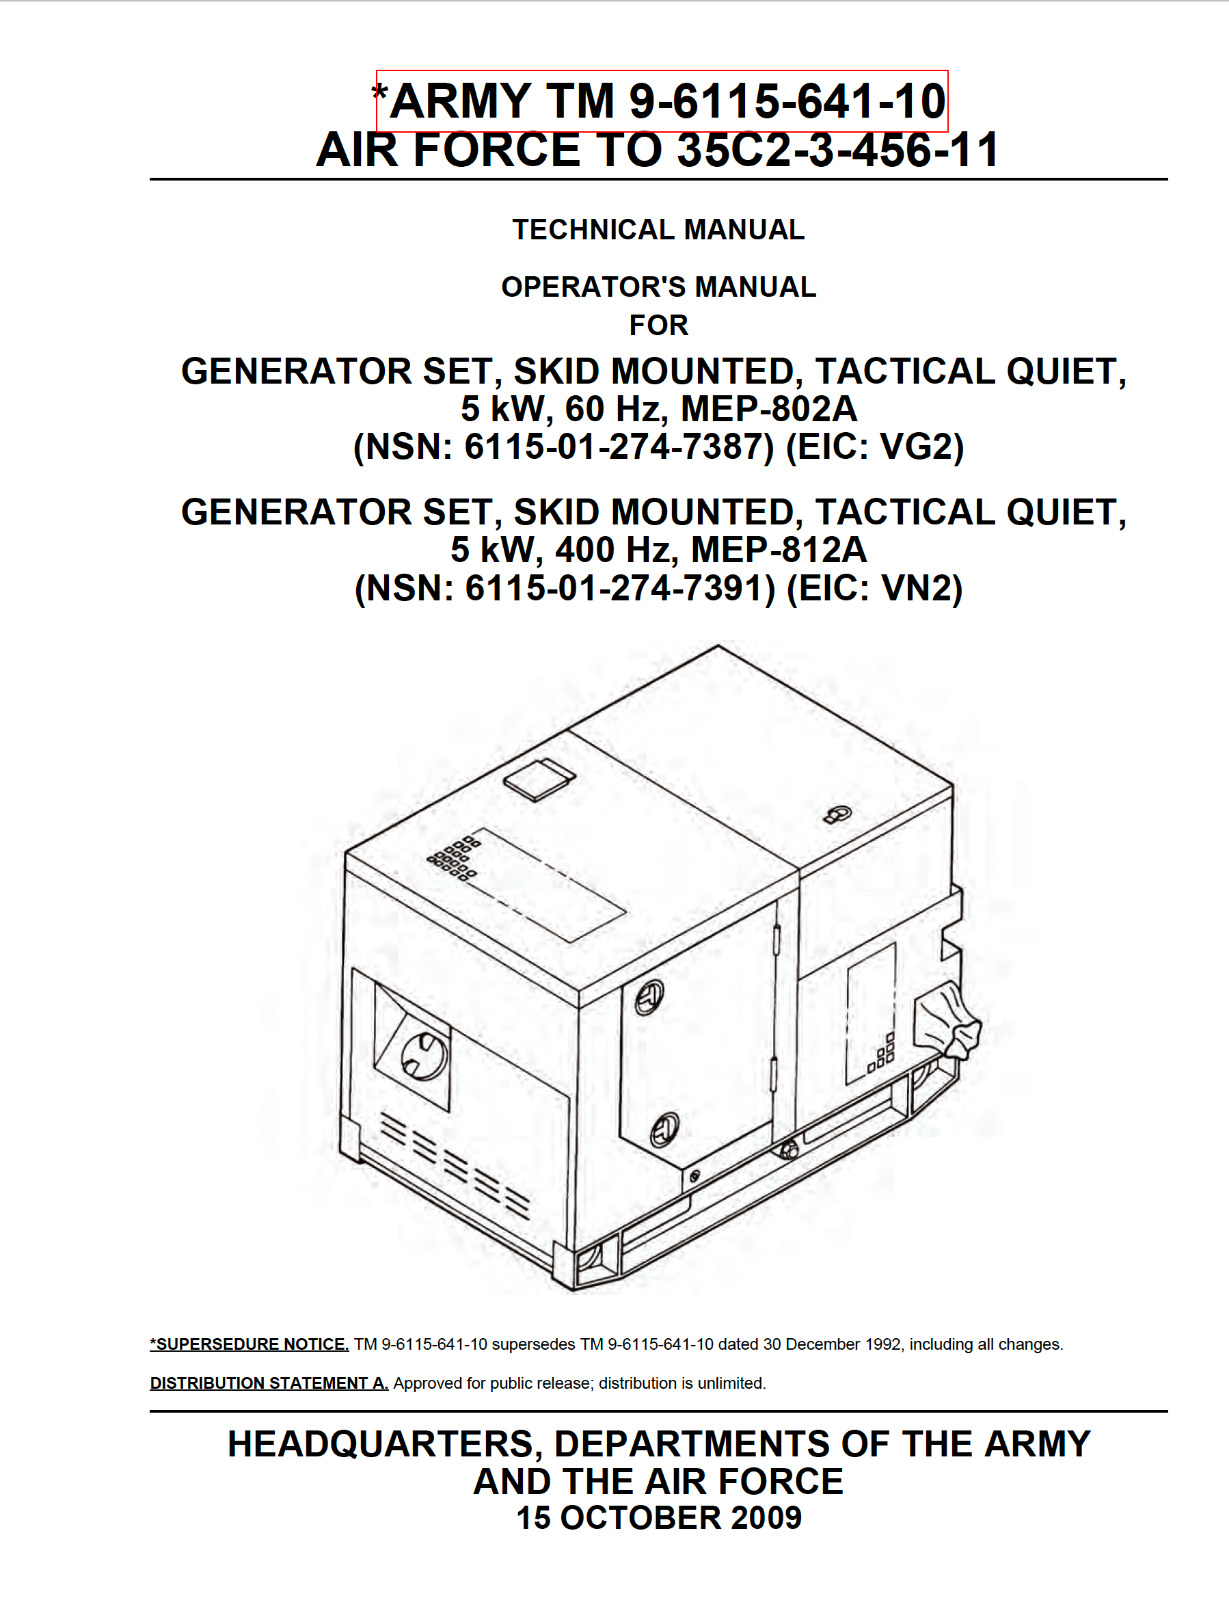 152 p. 5kW TACTICAL QUIET GENERATOR SET MEP-802A 812A Operator Manual on Data CD